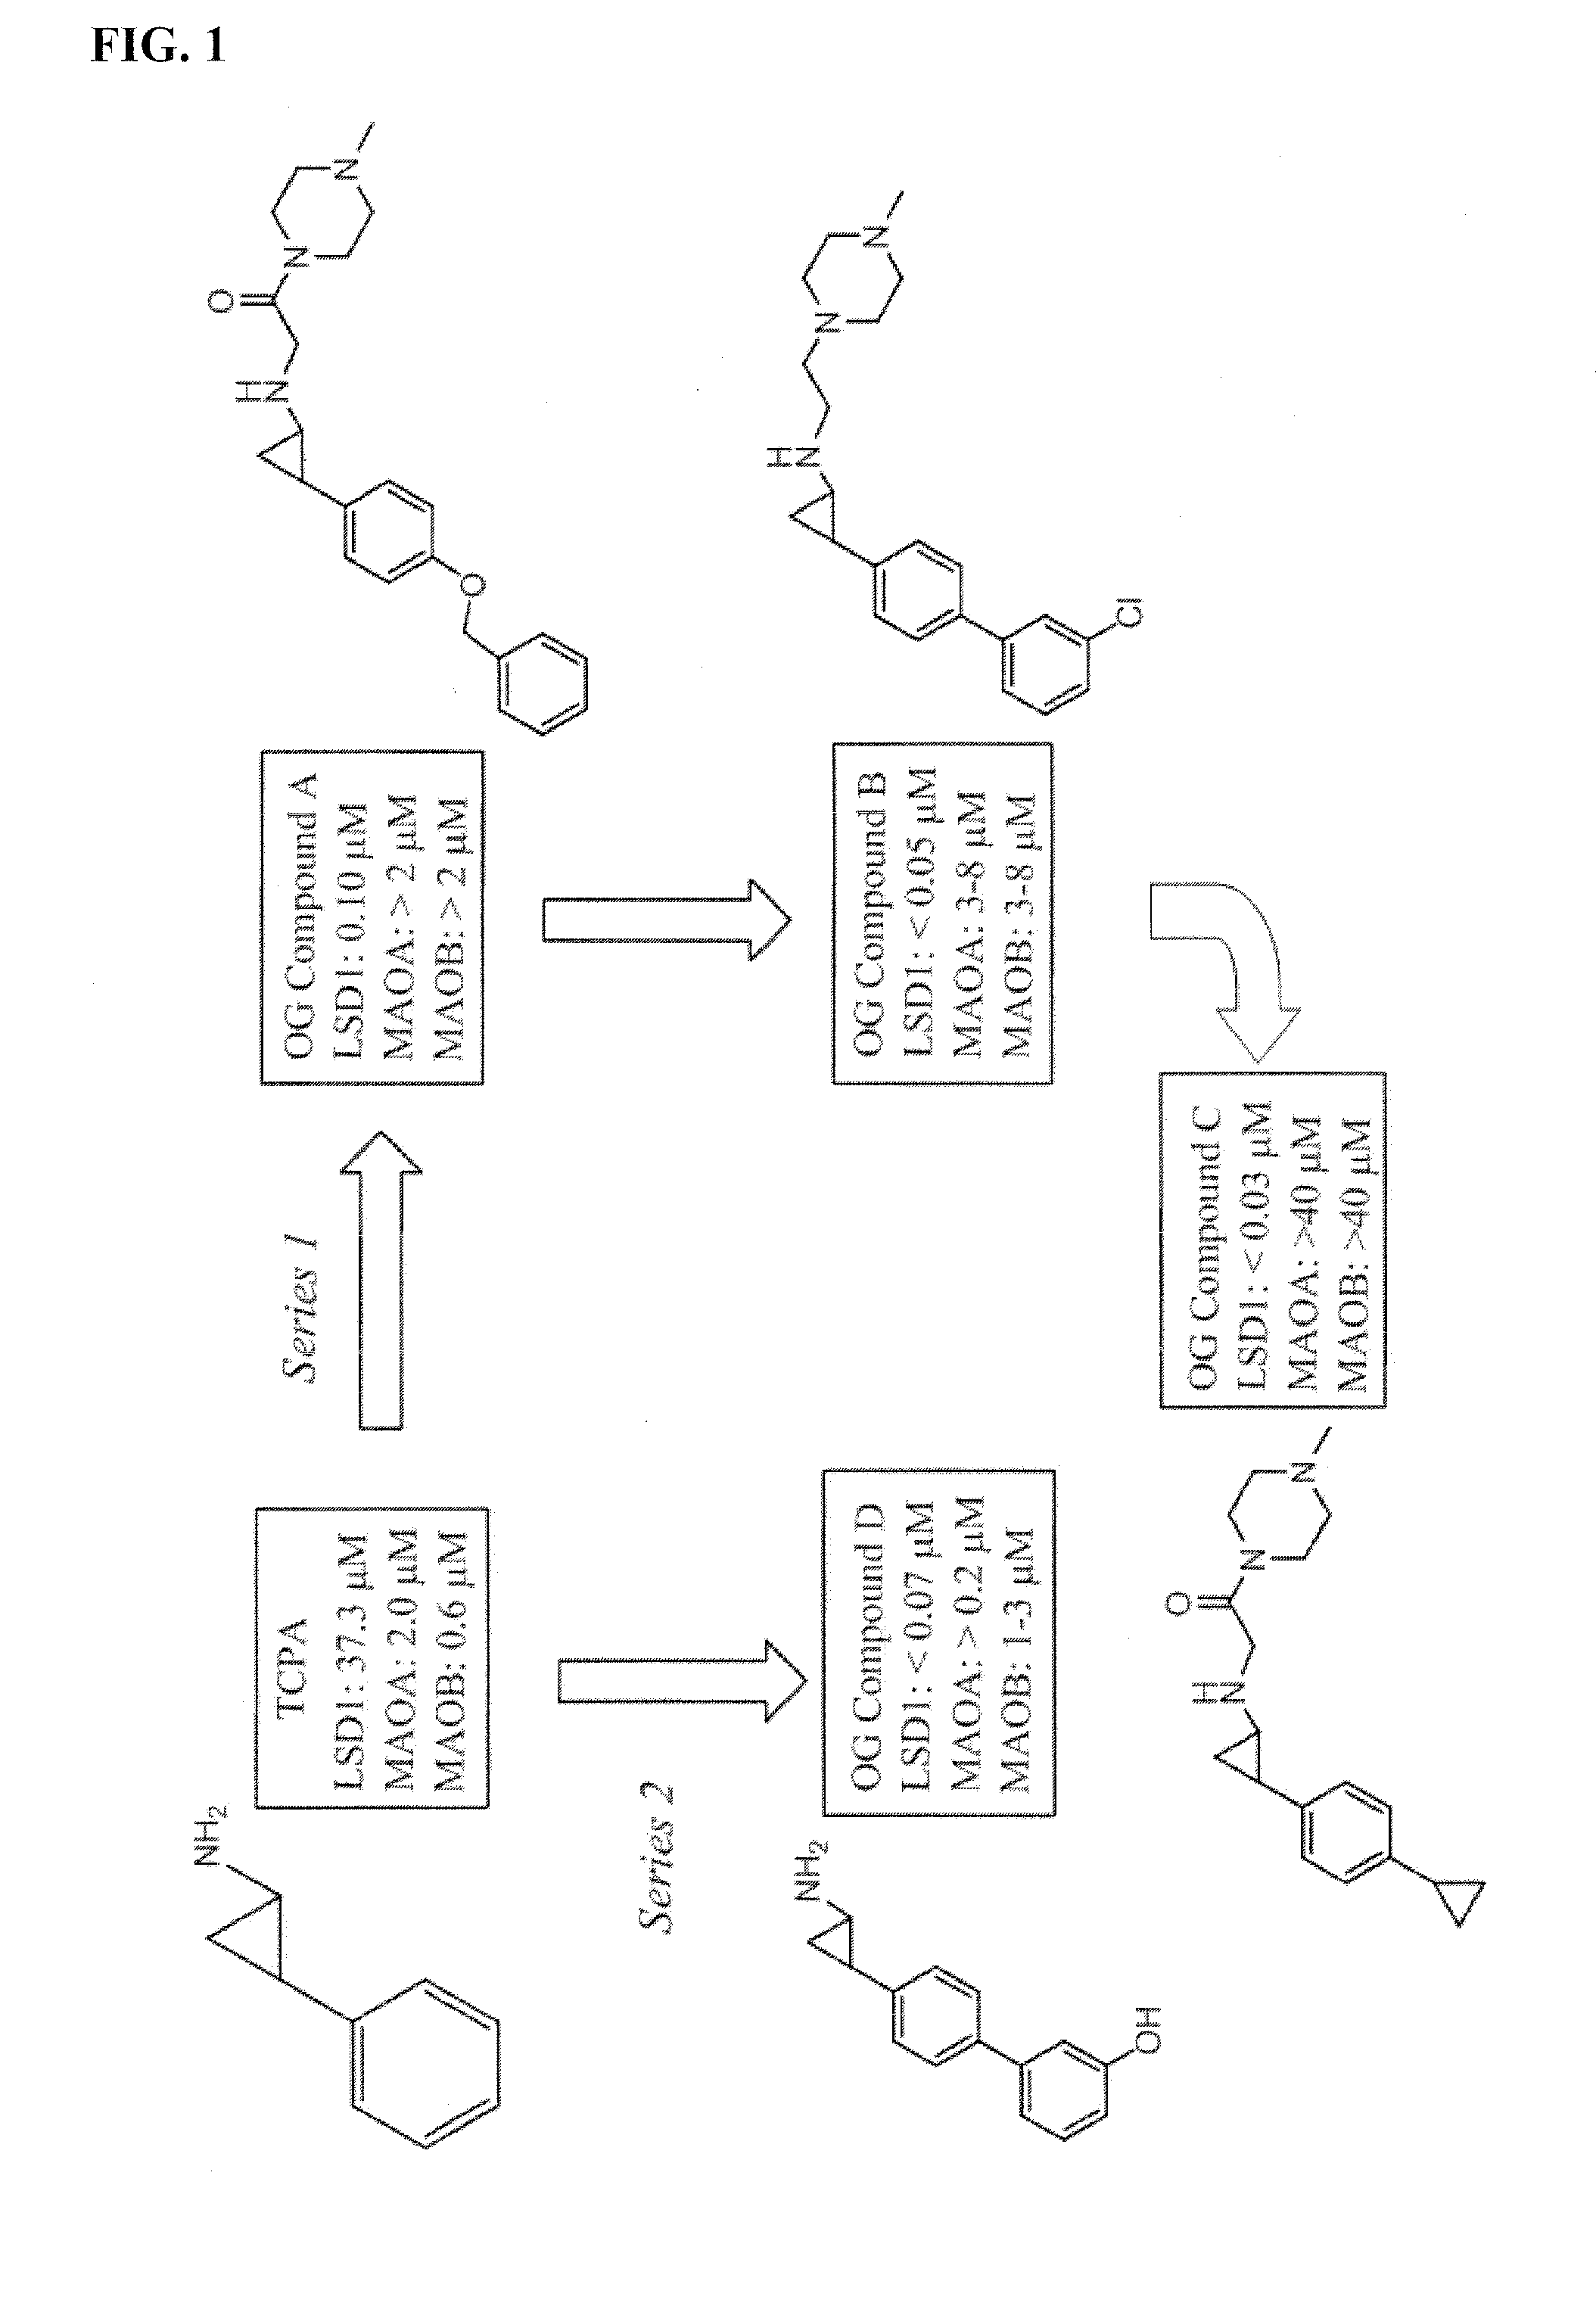 Lysine demethylase inhibitors for inflammatory diseases or conditions